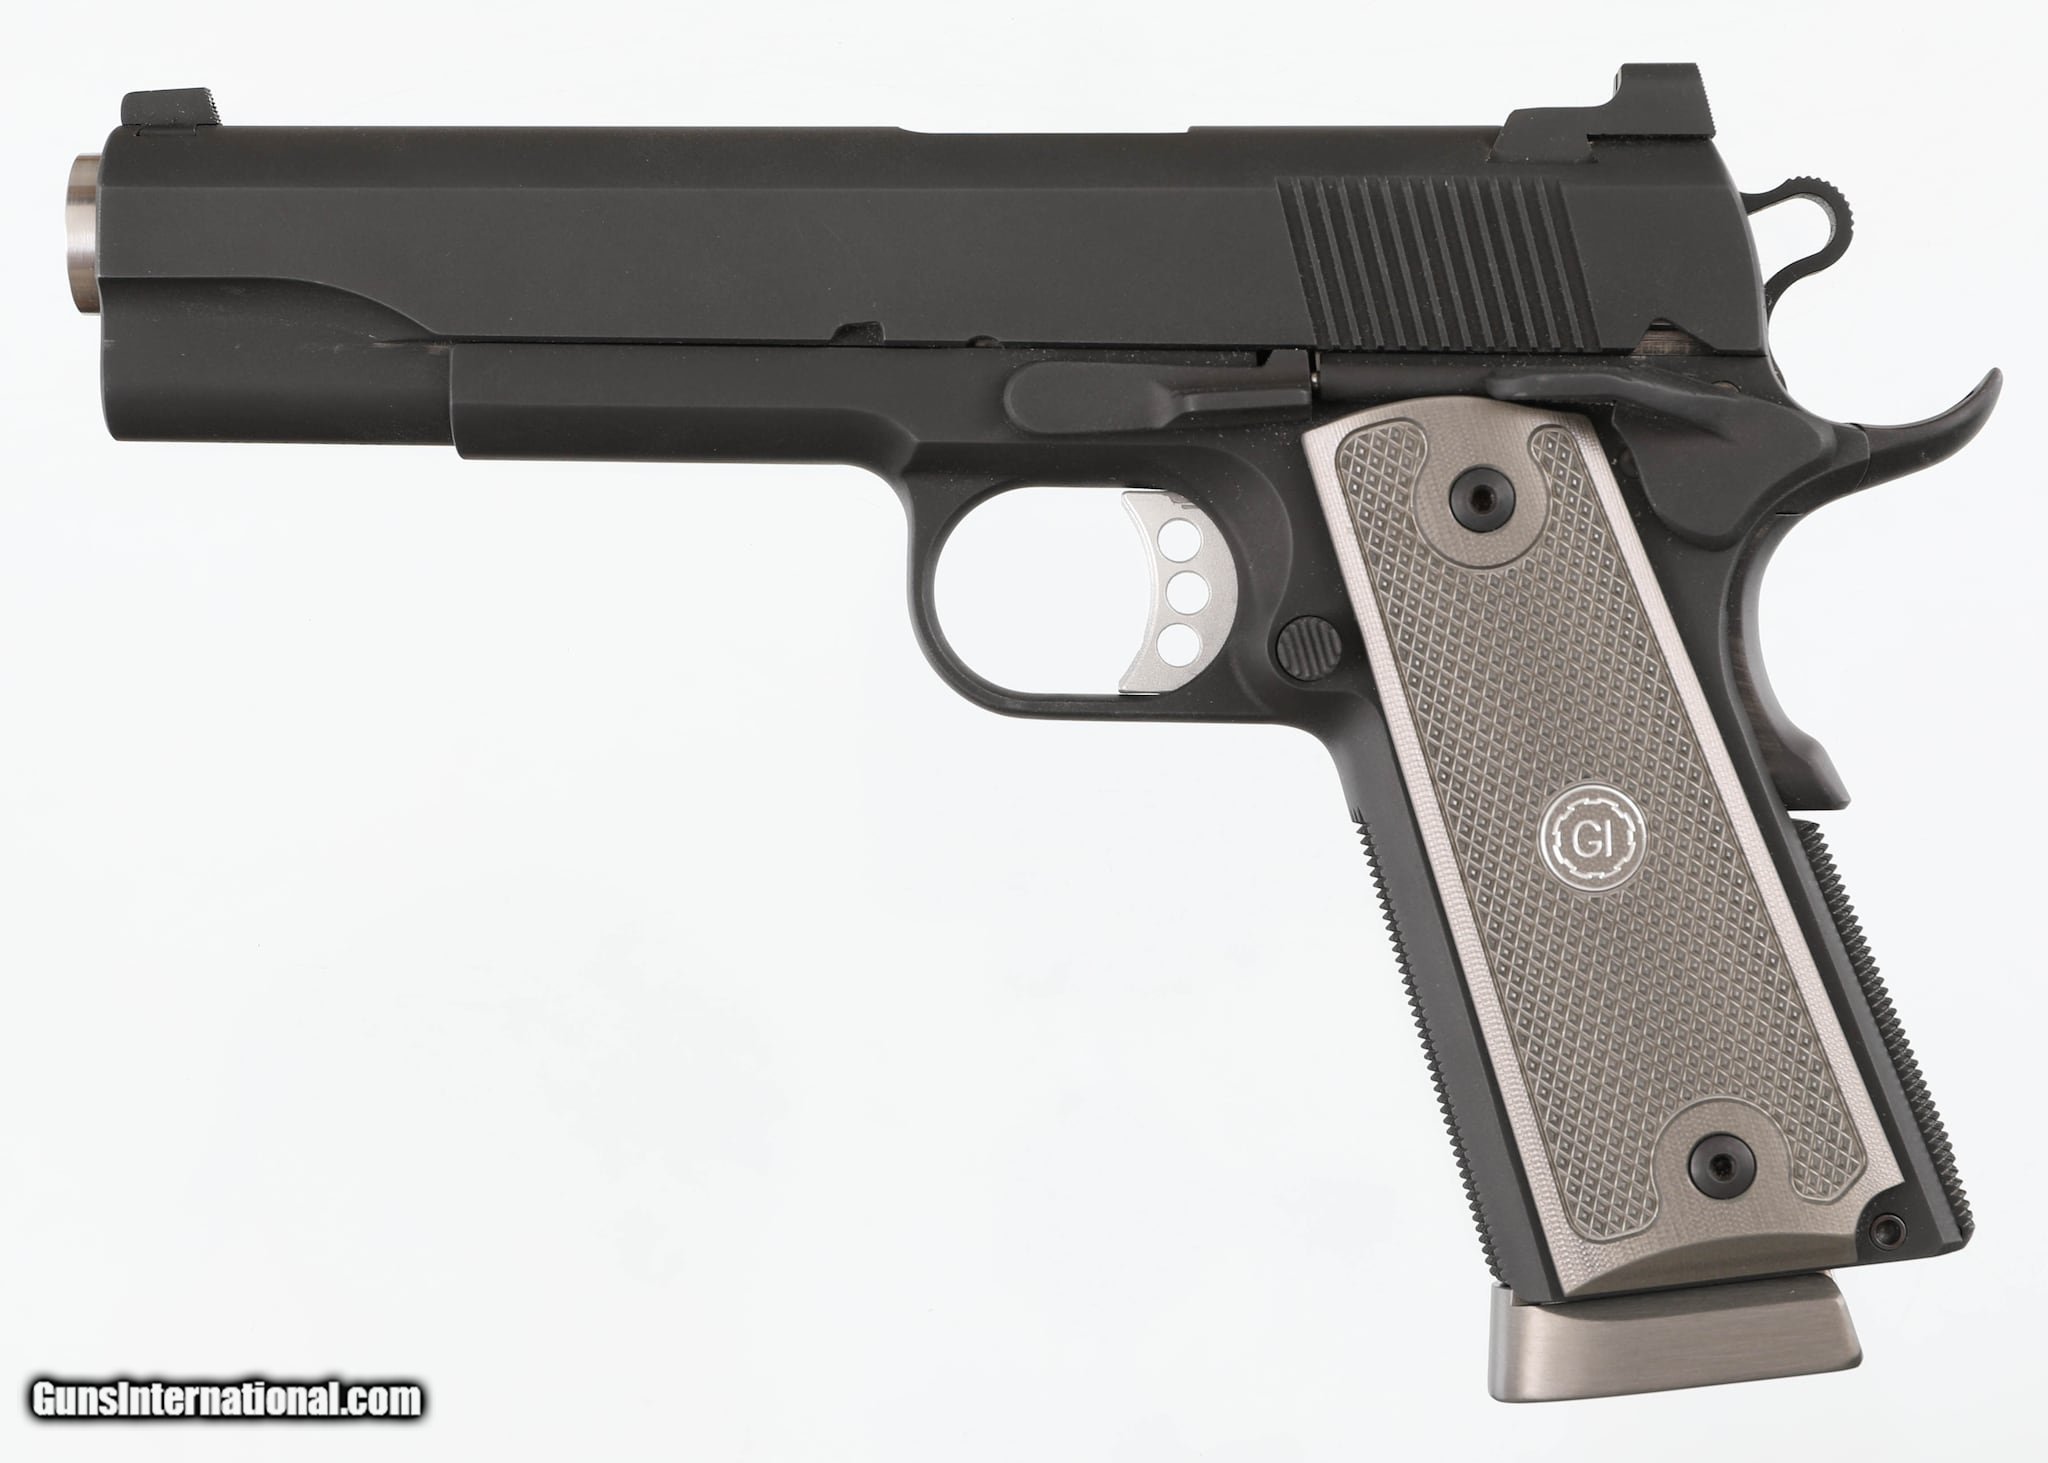 An Everyday Carry .50? Guncrafter Industries Custom No. 3 FRAG 1911